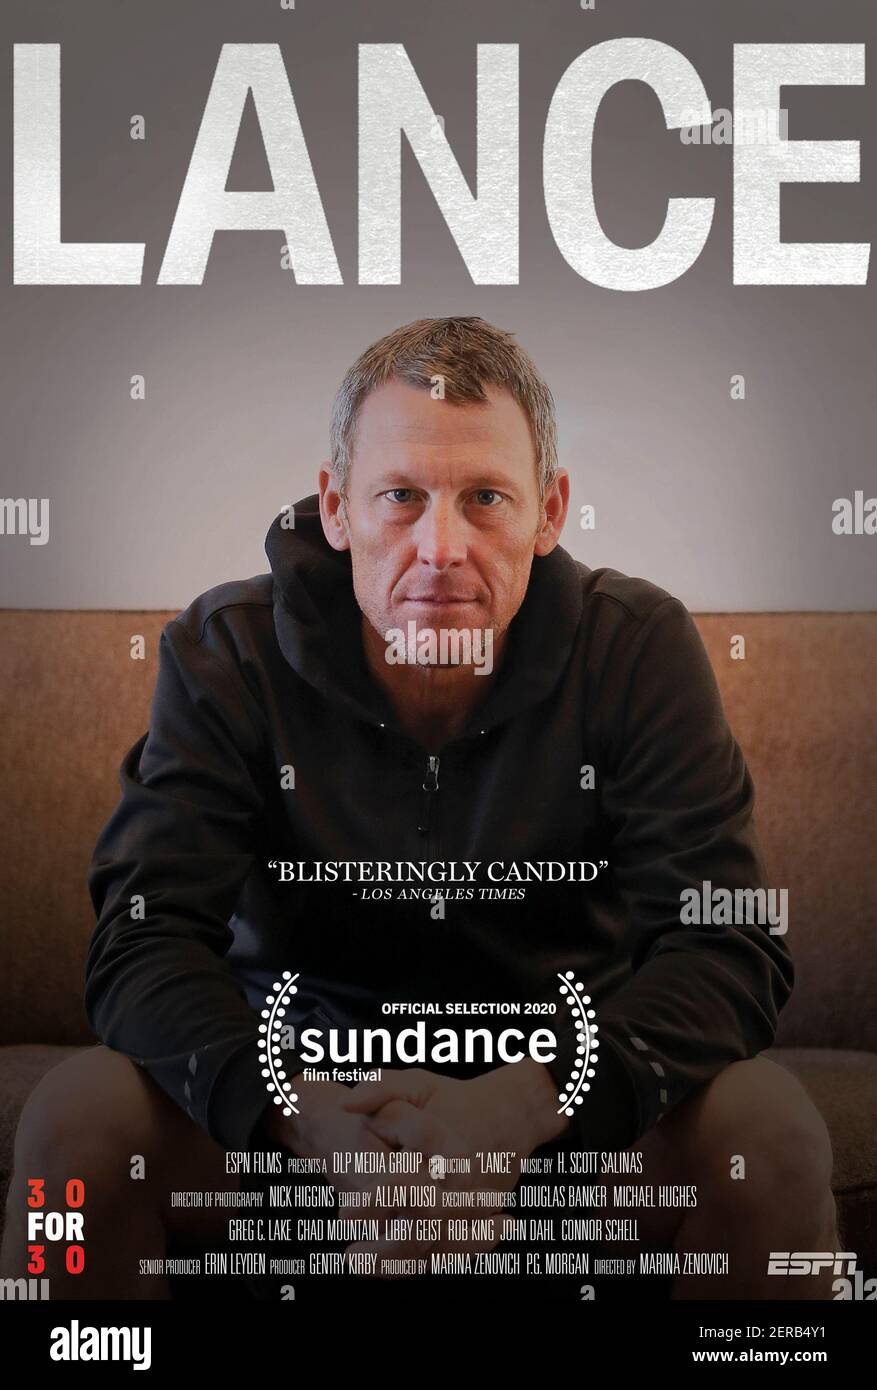 Lance (2020) directed by Marina Zenovich and starring Lance Armstrong, Tyler Hamilton and George Hincapie. A personal examination of the rise and fall of Lance Armstrong. Stock Photo